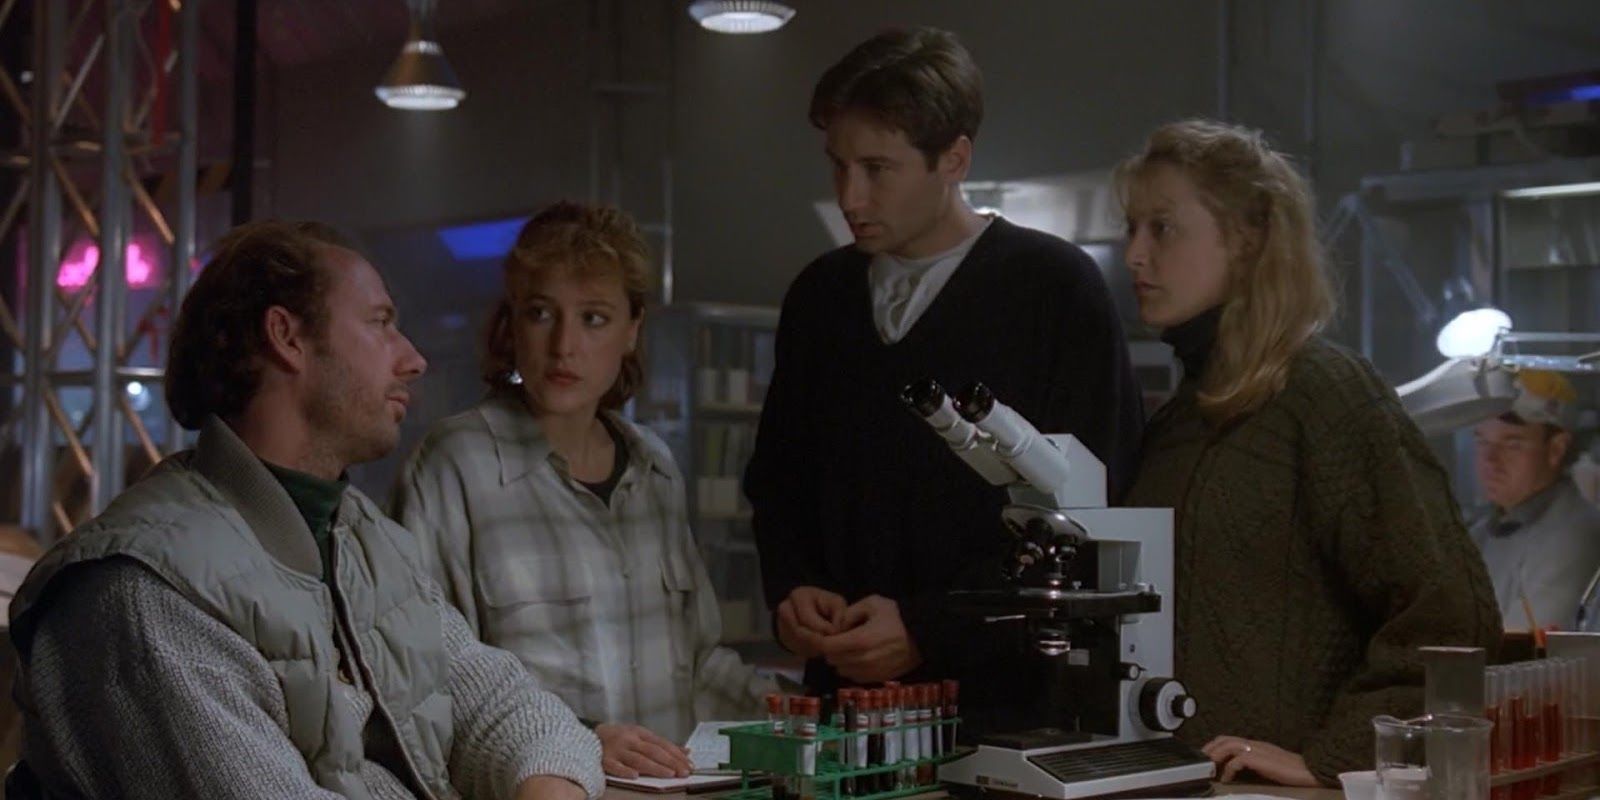 The small cast of The X-Files homage to The Thing, &quot;Ice.&quot;